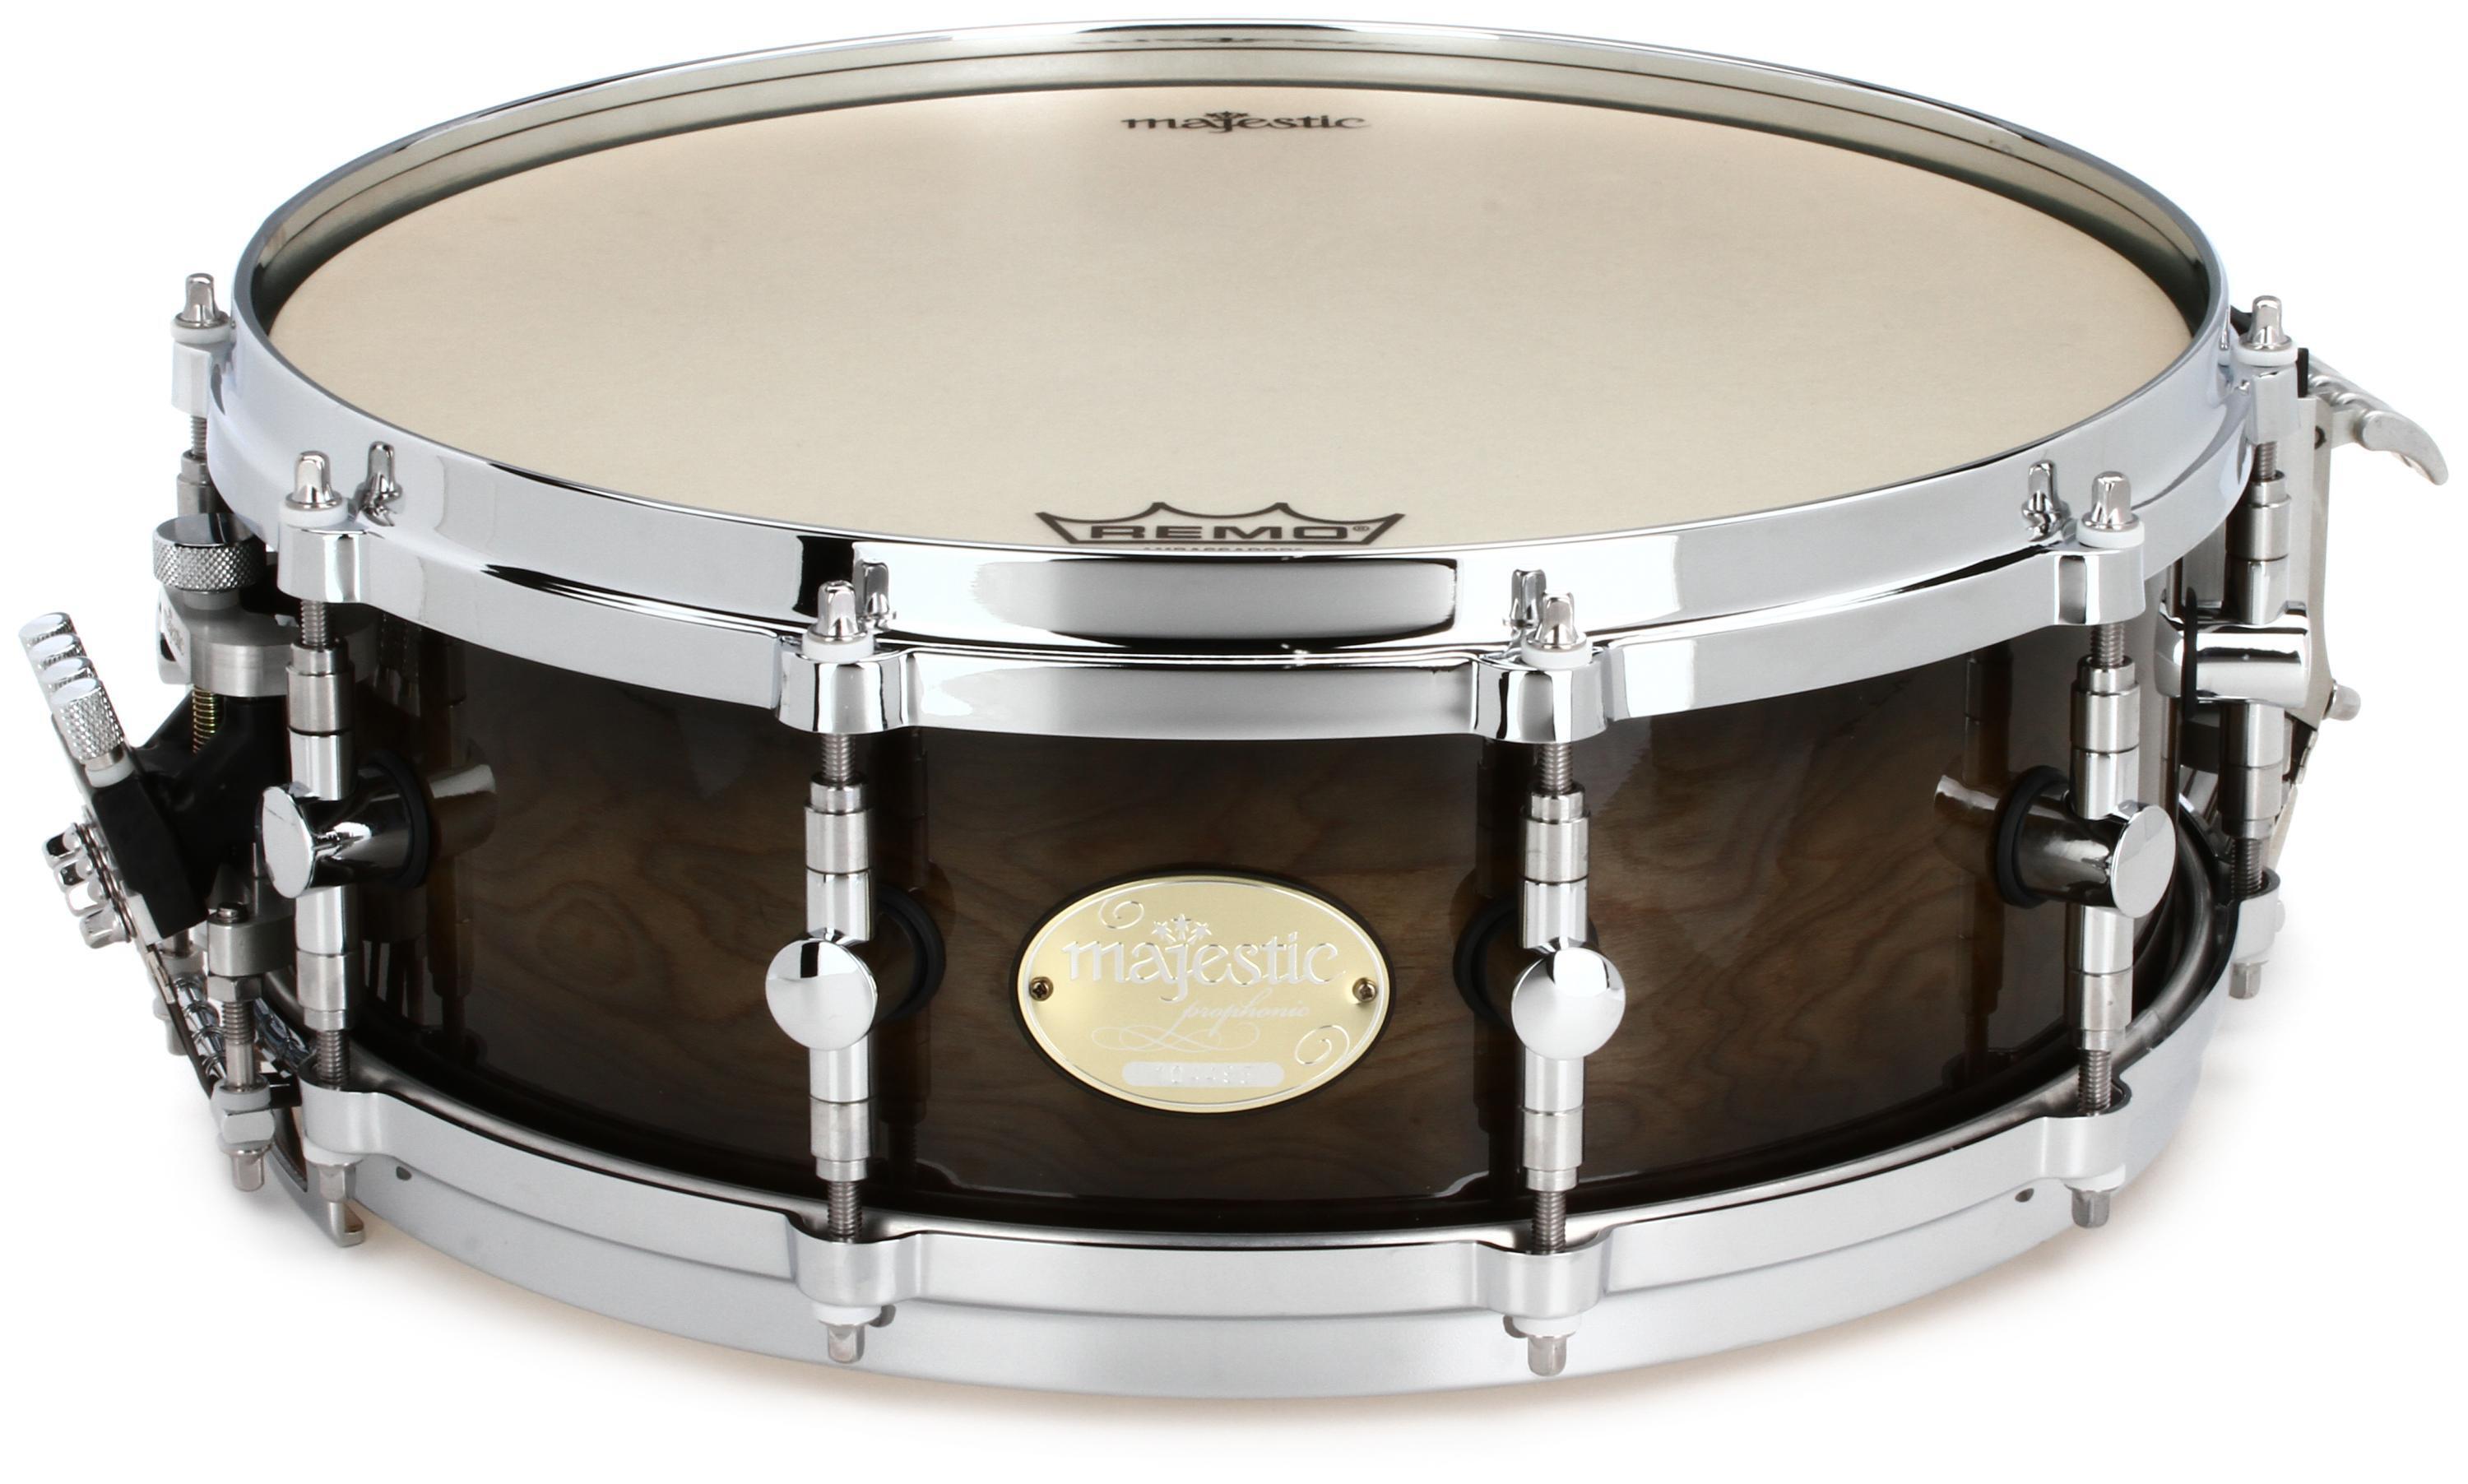 Majestic Prophonic Thick Maple Snare Drum - 14-inch x 5-inch